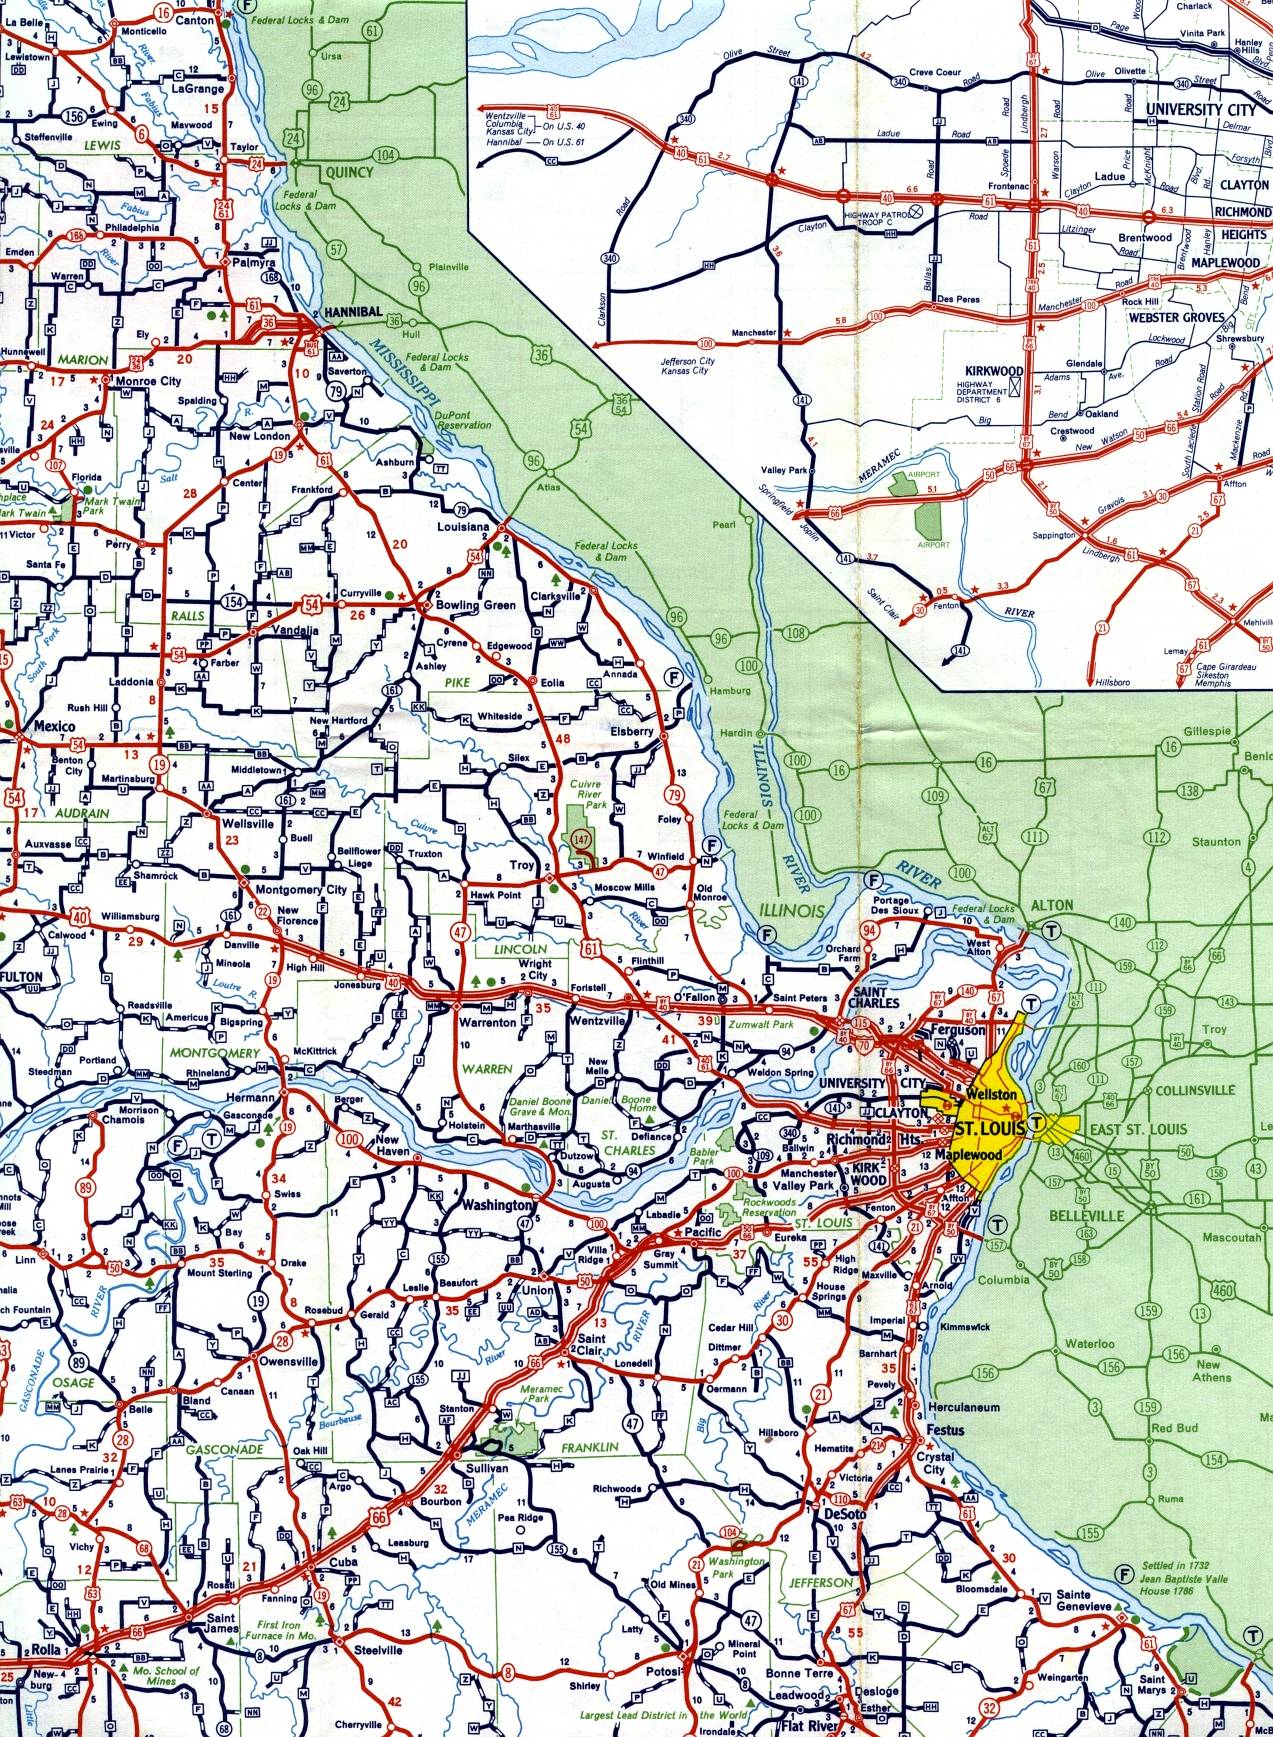 East-central section of Missouri from 1959 official highway map